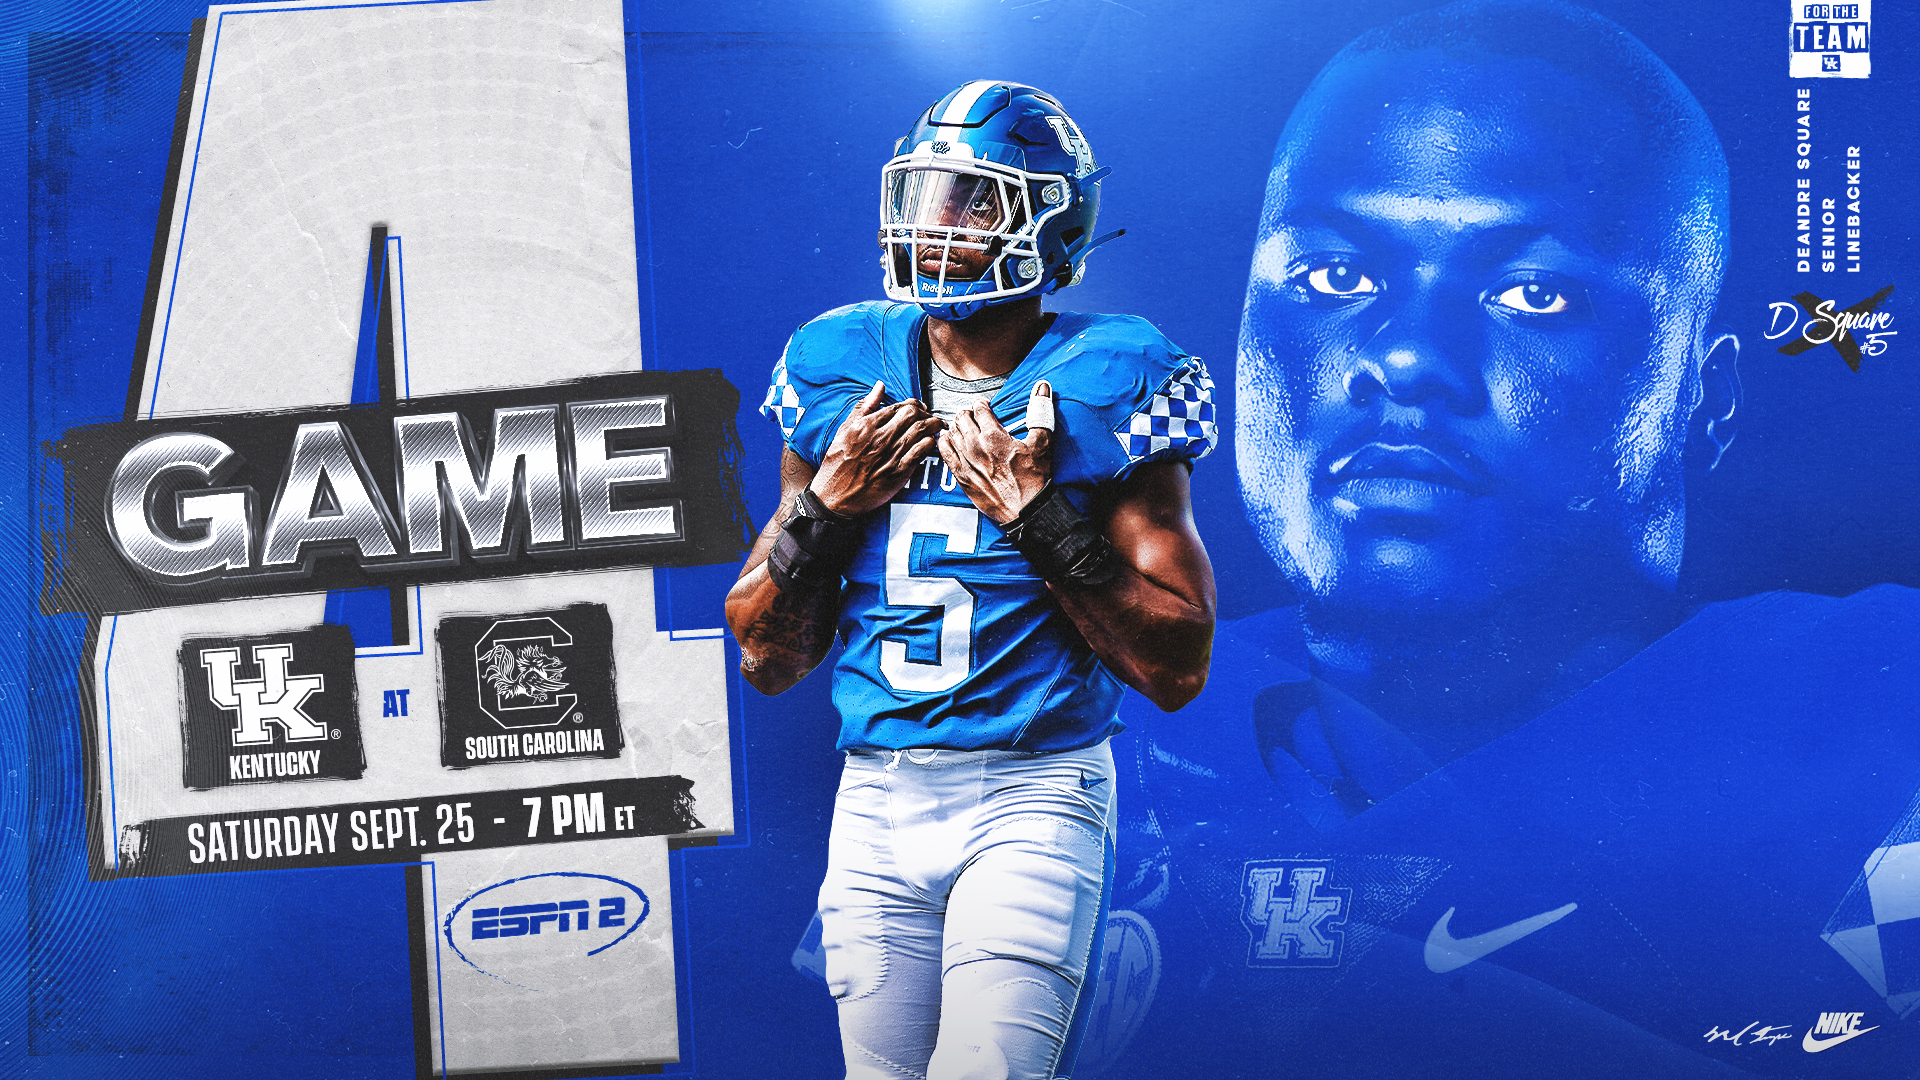 Kentucky Hits the Road for First Time, Visiting South Carolina